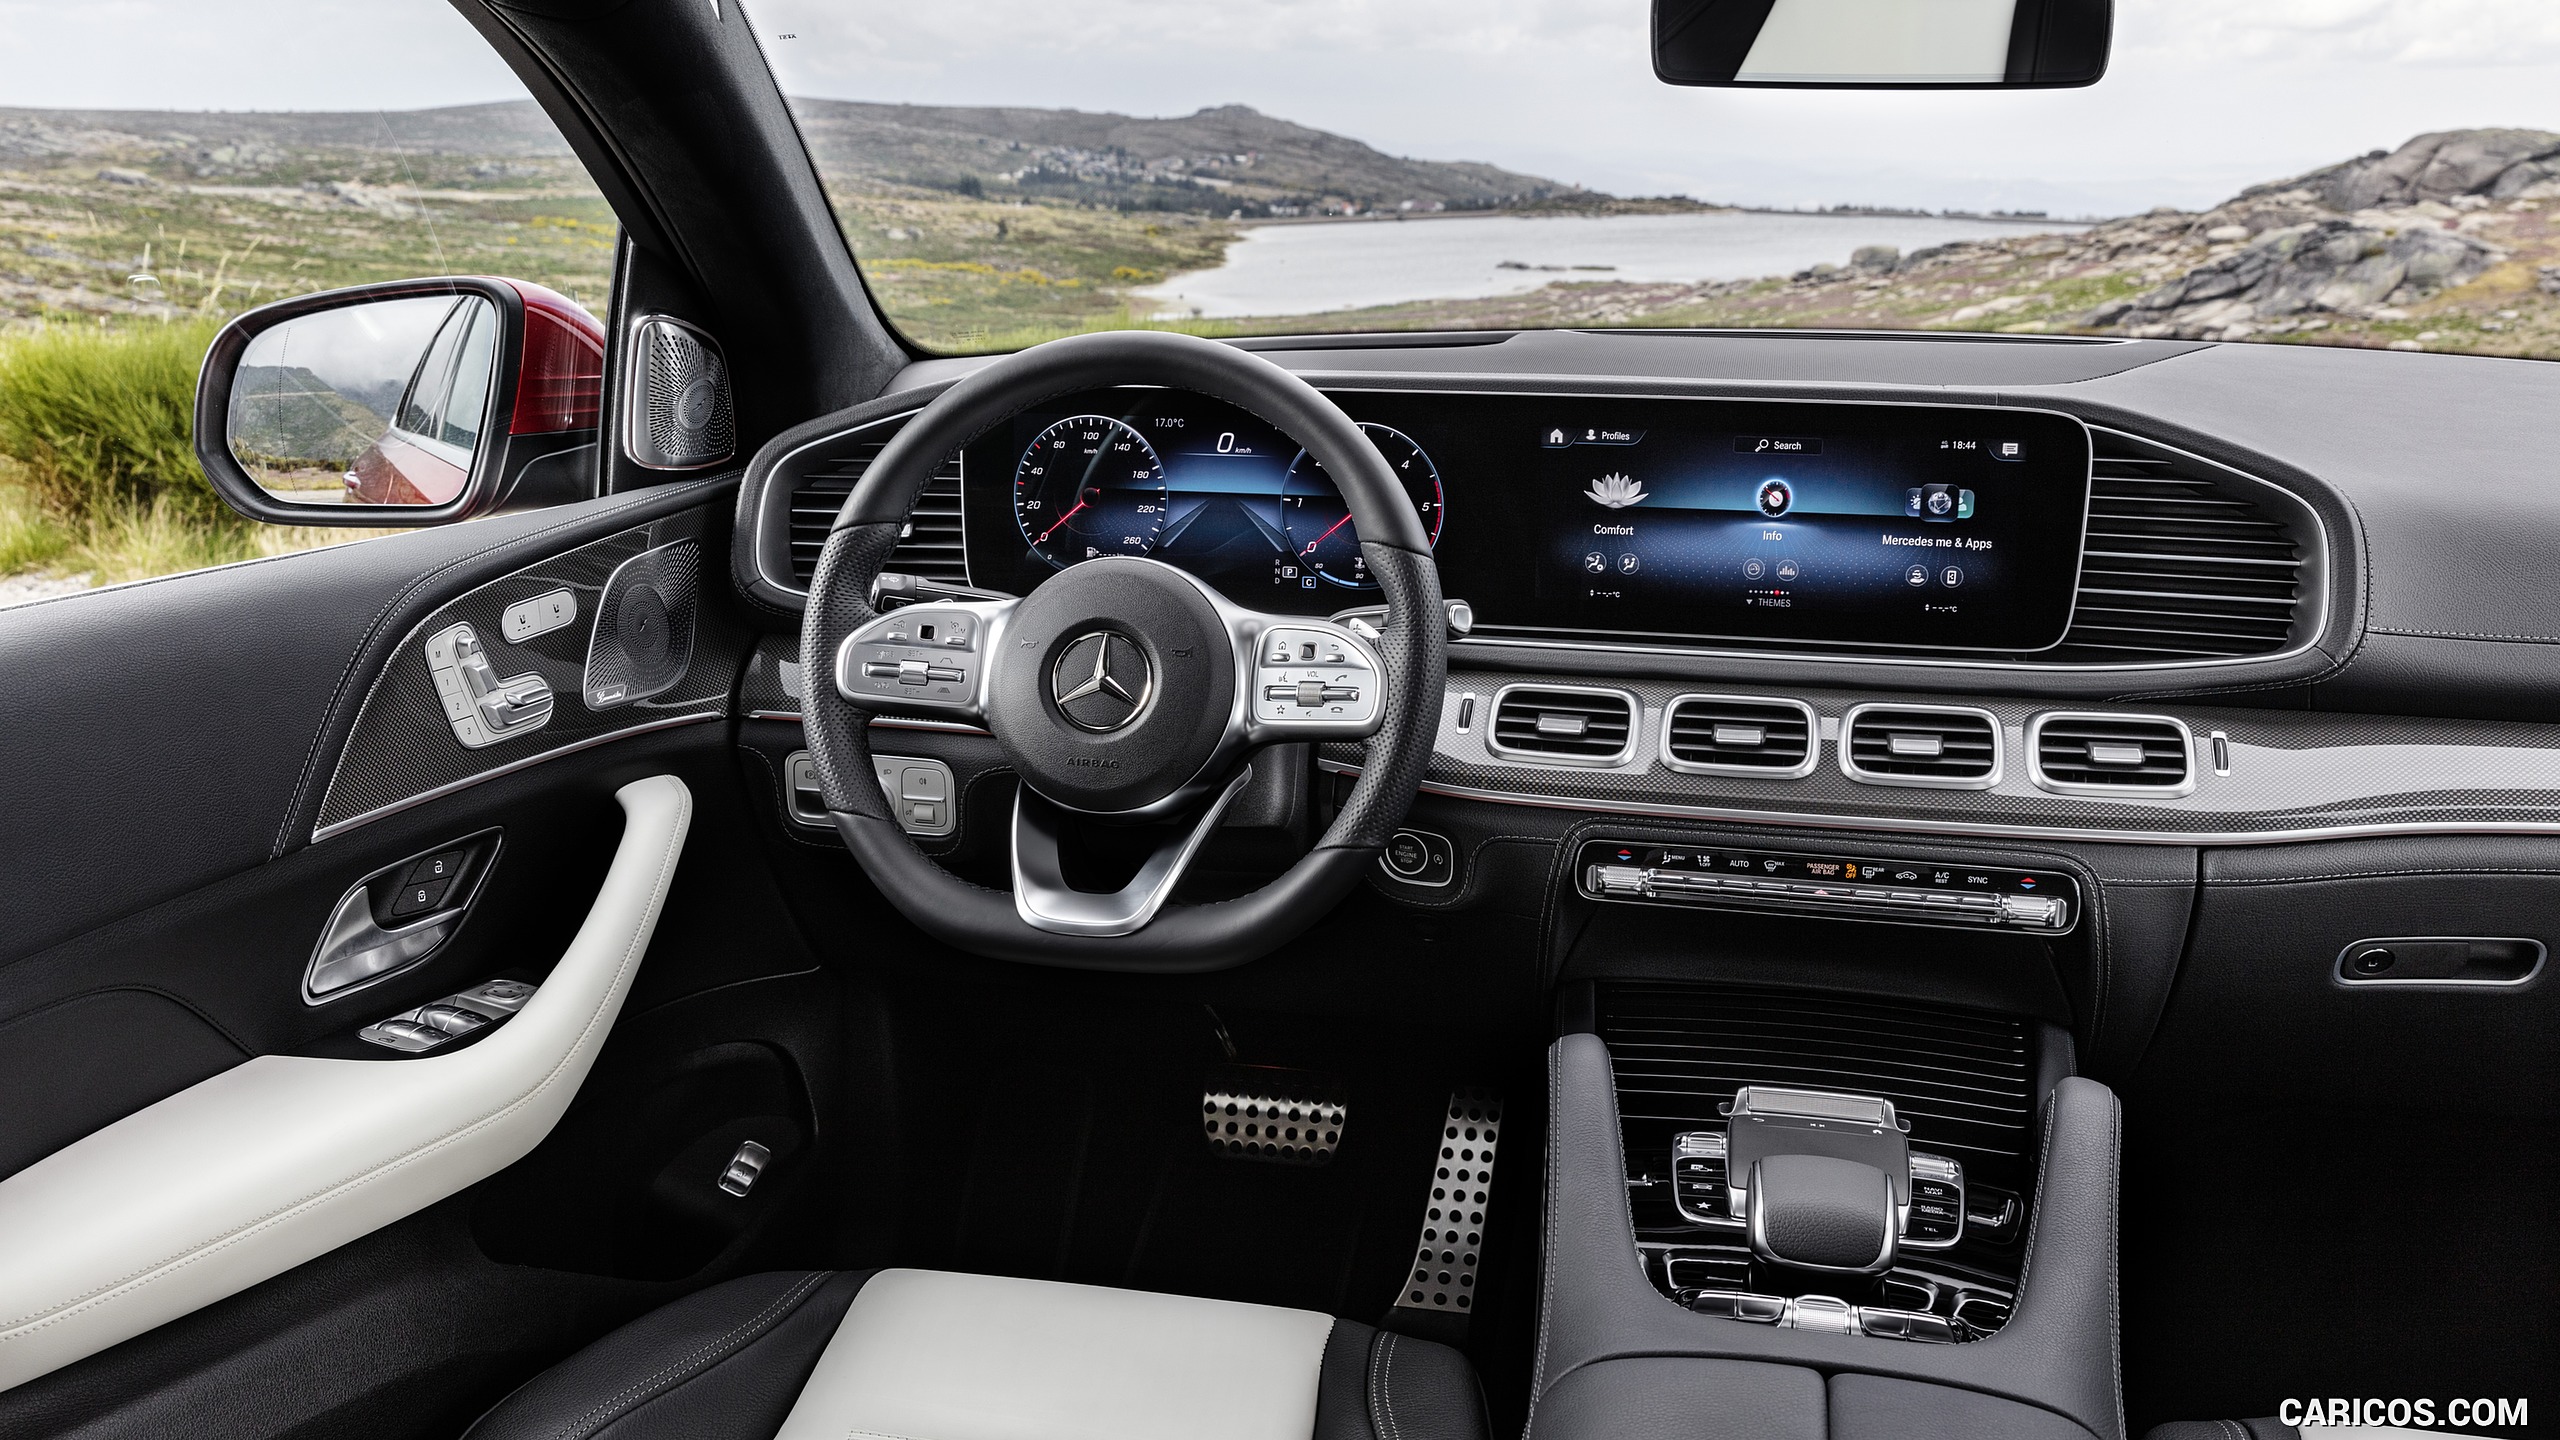 2021 Mercedes-Benz GLE Coupe - Interior, Cockpit, #19 of 62